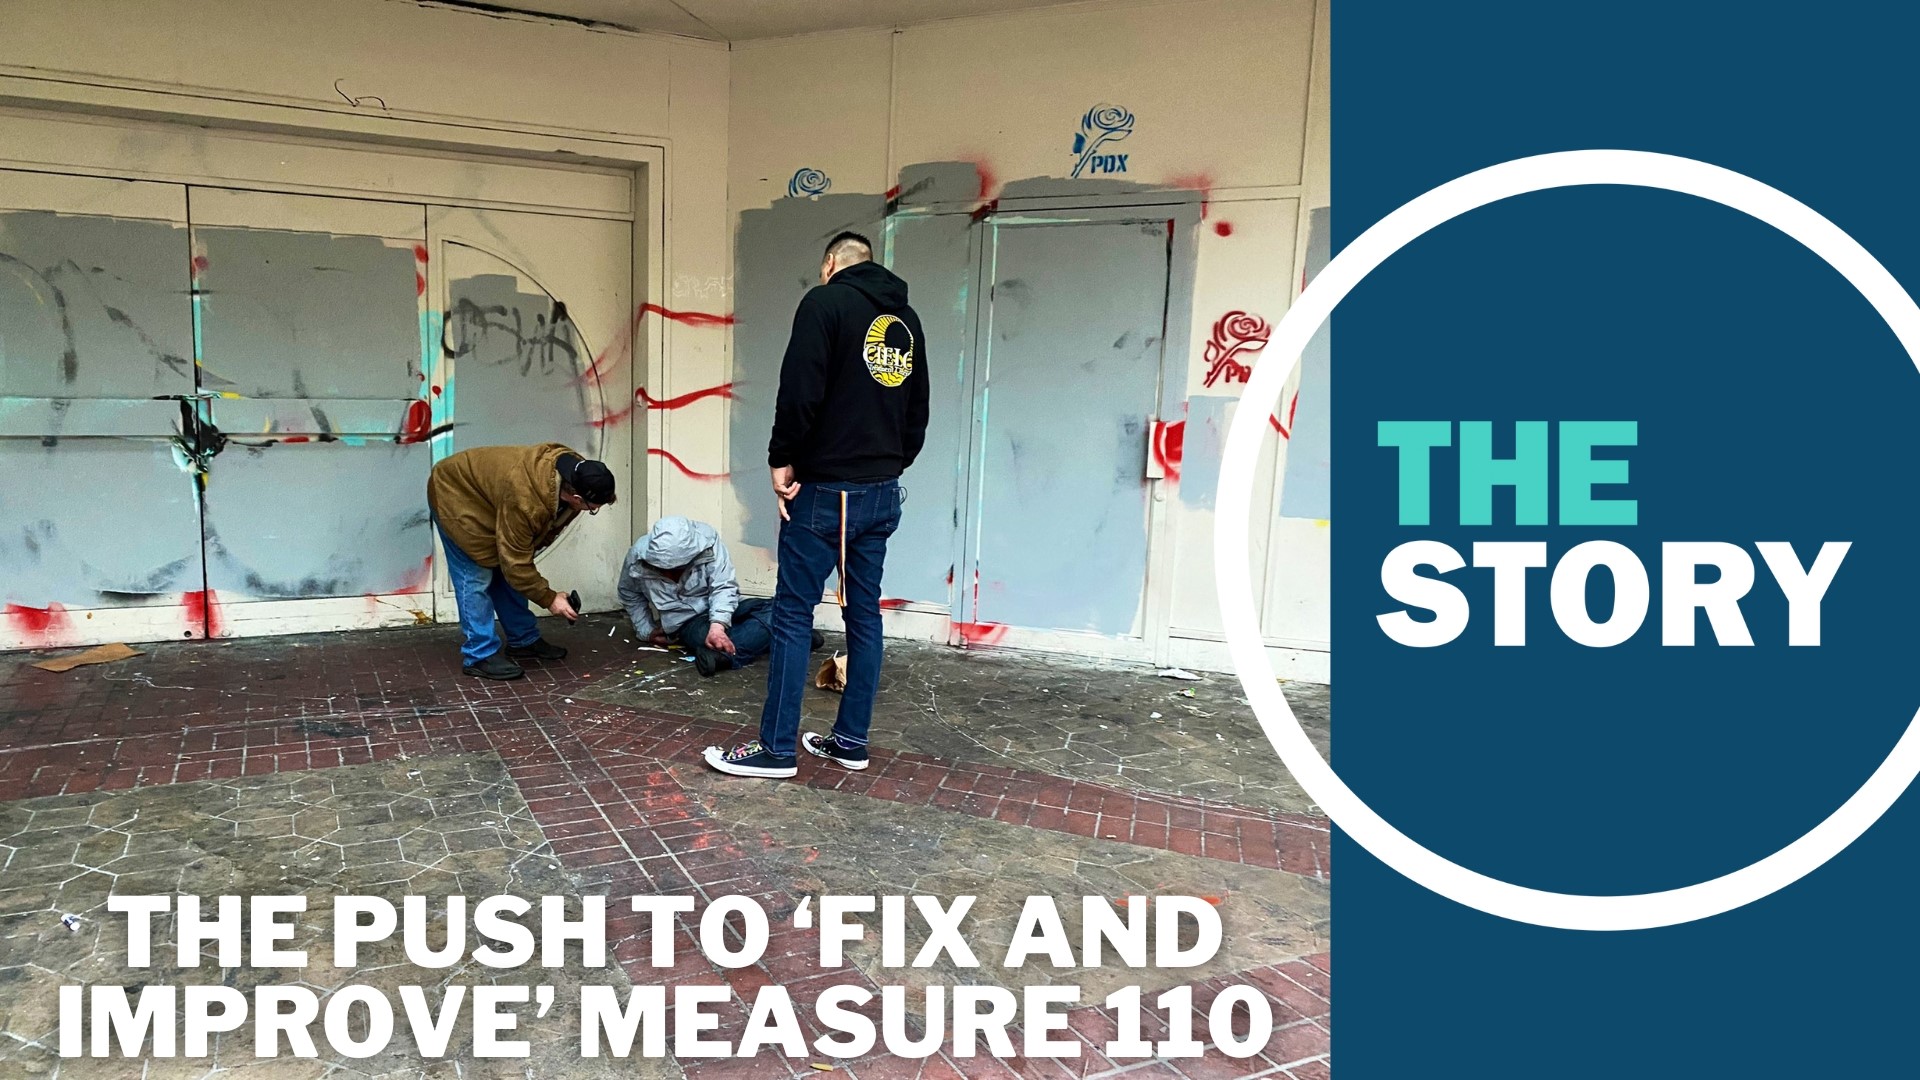 The Coalition to Fix and Improve Measure 110 aims to do precisely that, according to backers. Here's a look at the fine print in their two initiatives.